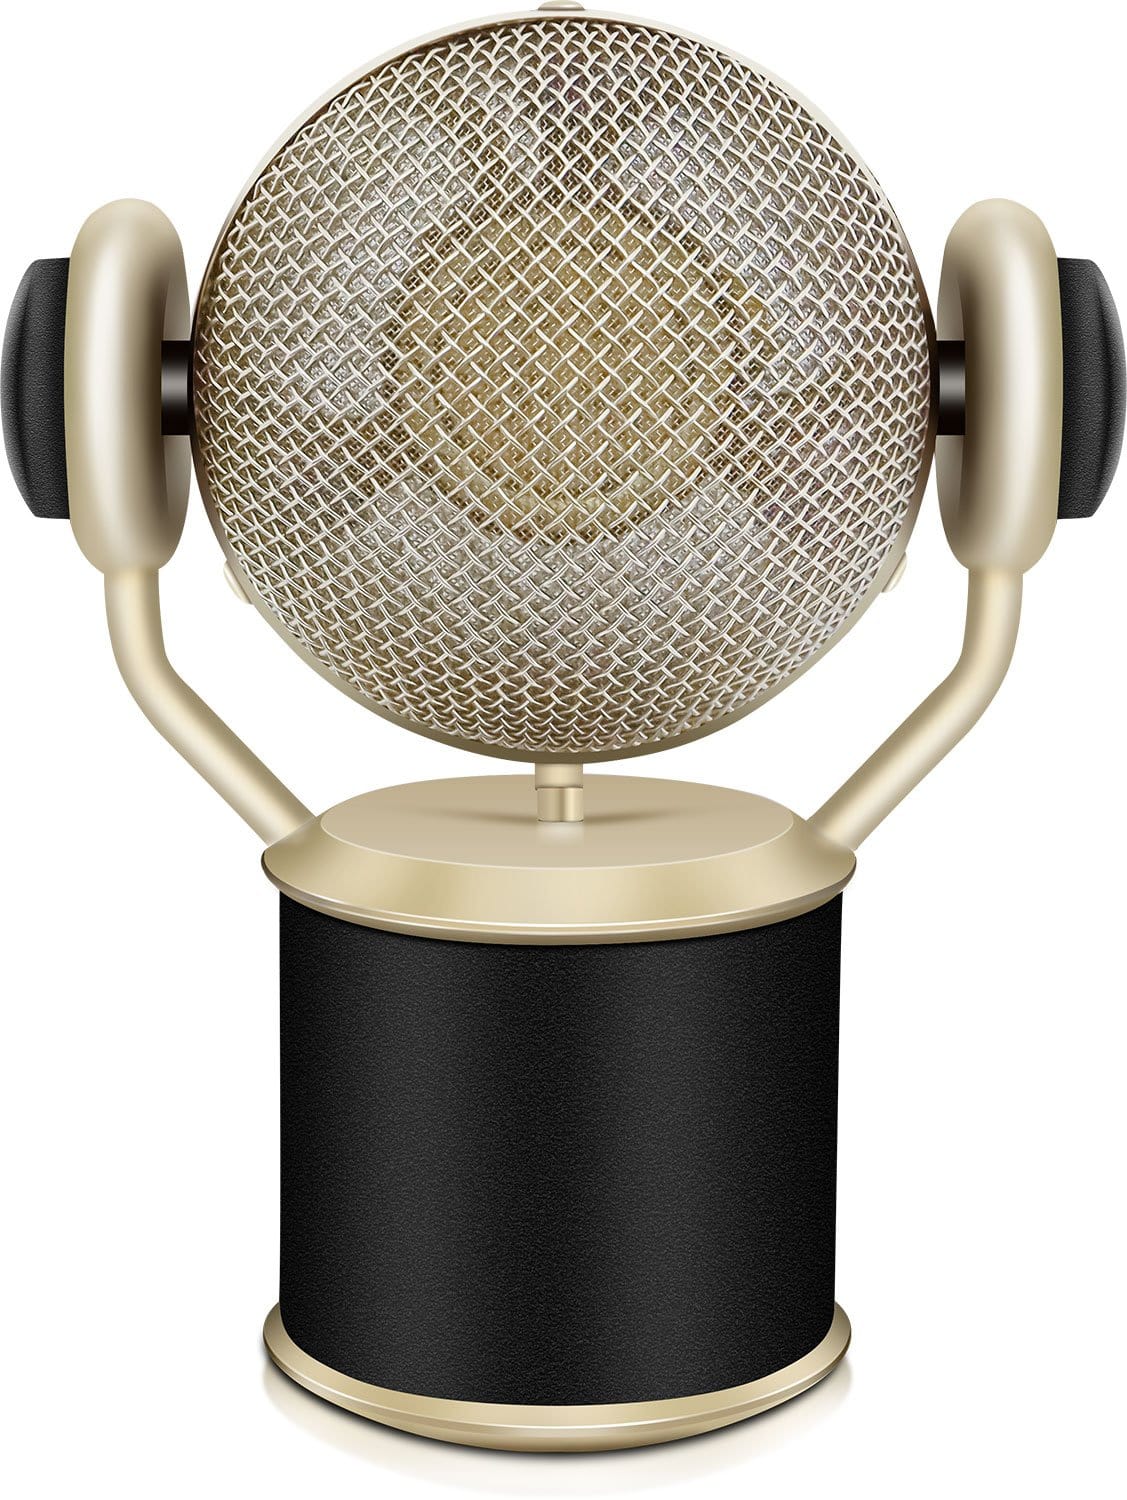 Icon Martian Large Diaphragm Condenser Microphone - ProSound and Stage Lighting